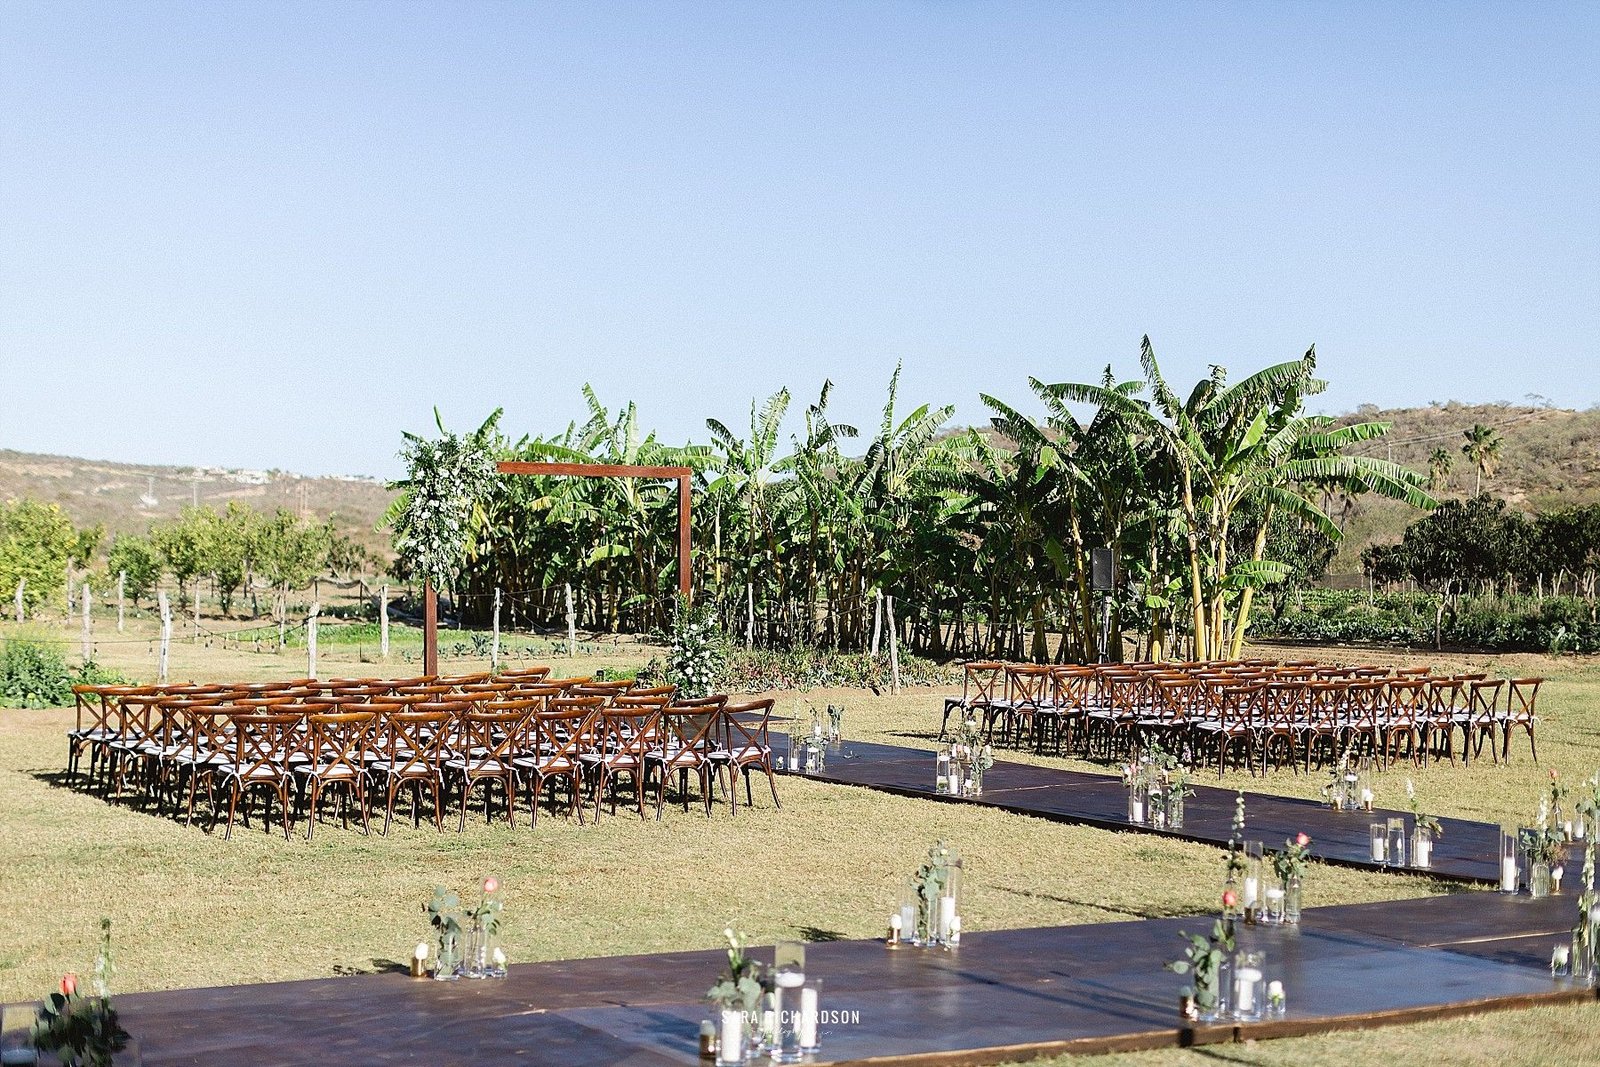 This is the Ceremony setting for Lindsey and Noel's Wedding. They decided to have a hard wooden floor for their guests so they do not have to walk in the grass, since most of them wore heels. We decided to decorate the aisle and make it look a little fuller.